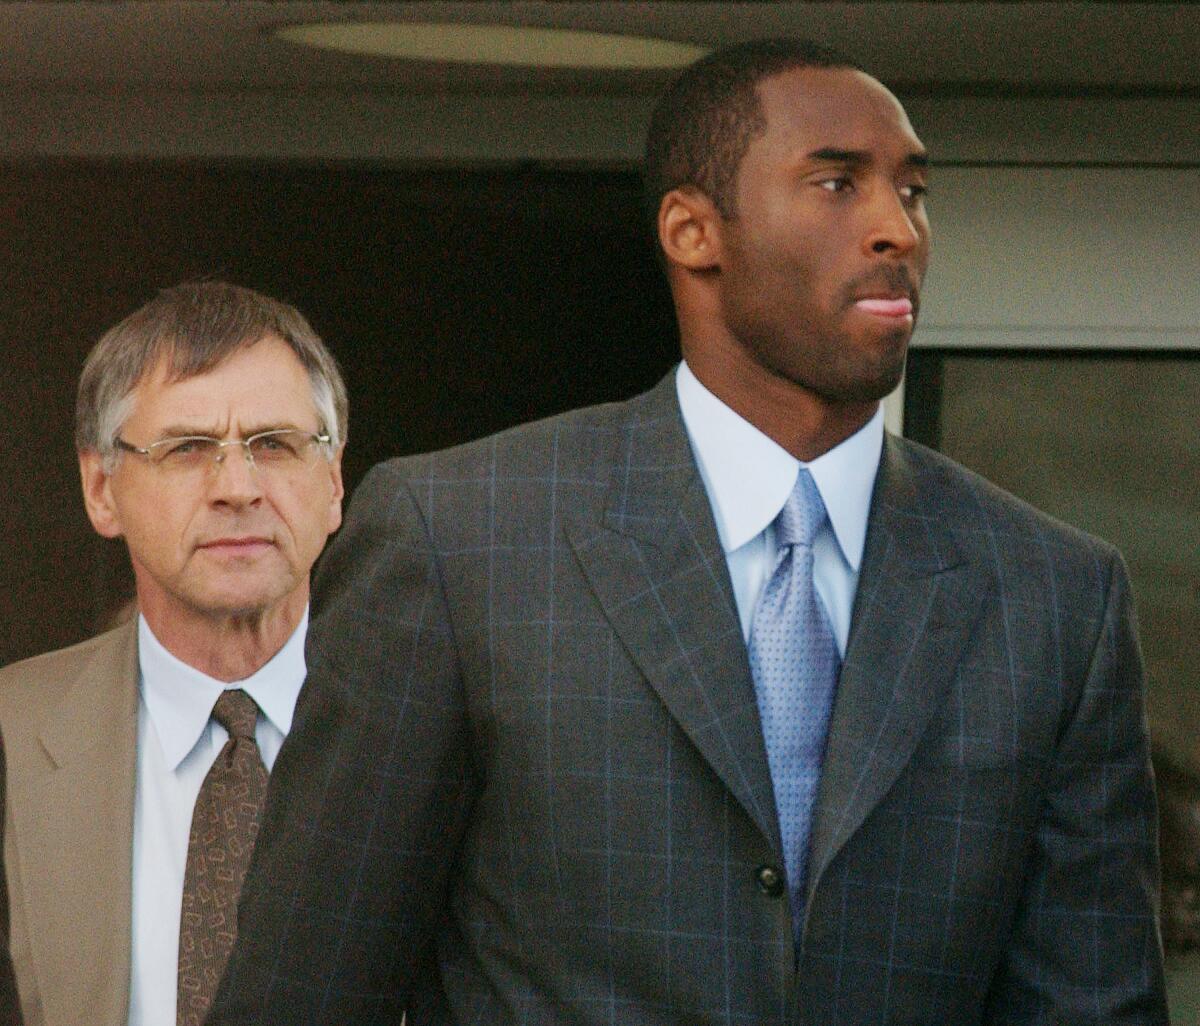 Kobe Bryant and attorney Hal Haddon leave the Eagle County (Colo.) Justice Center after the third day of jury selection for the trial on sexual assault charges.